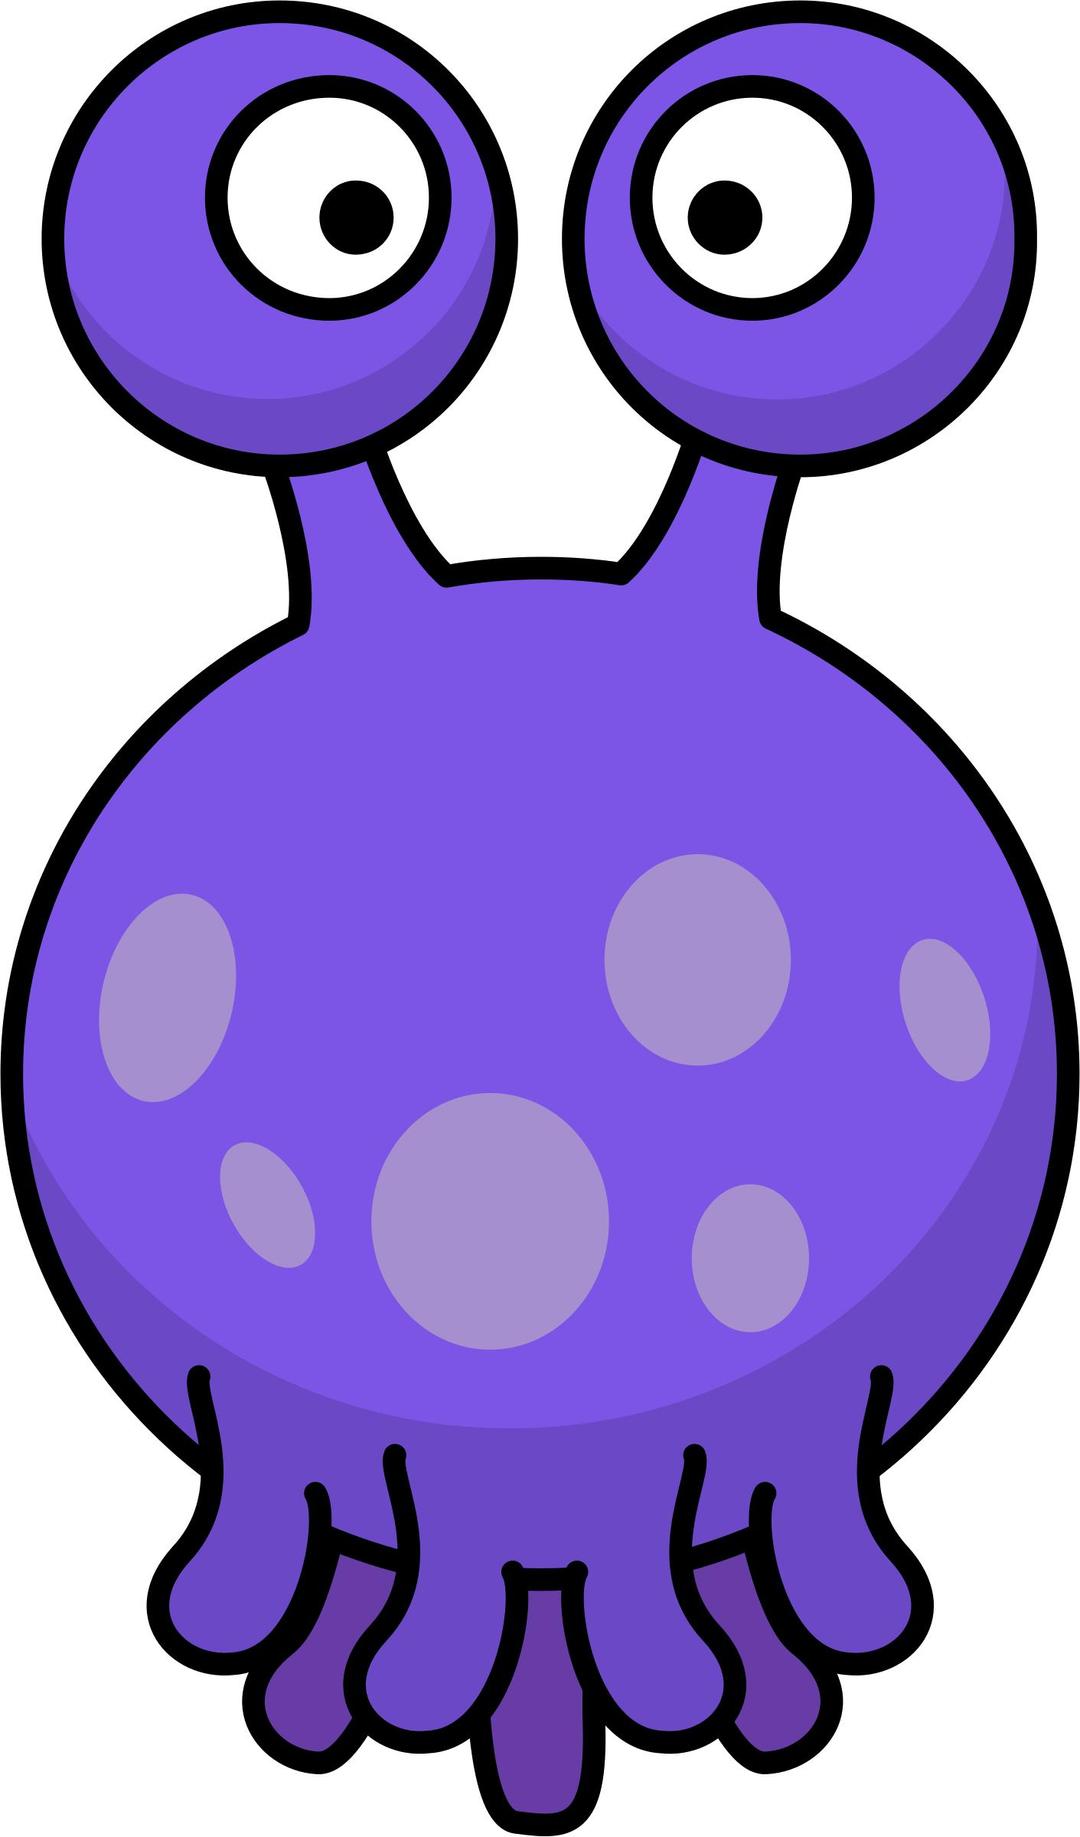 Floating silly alien with tentacles png transparent